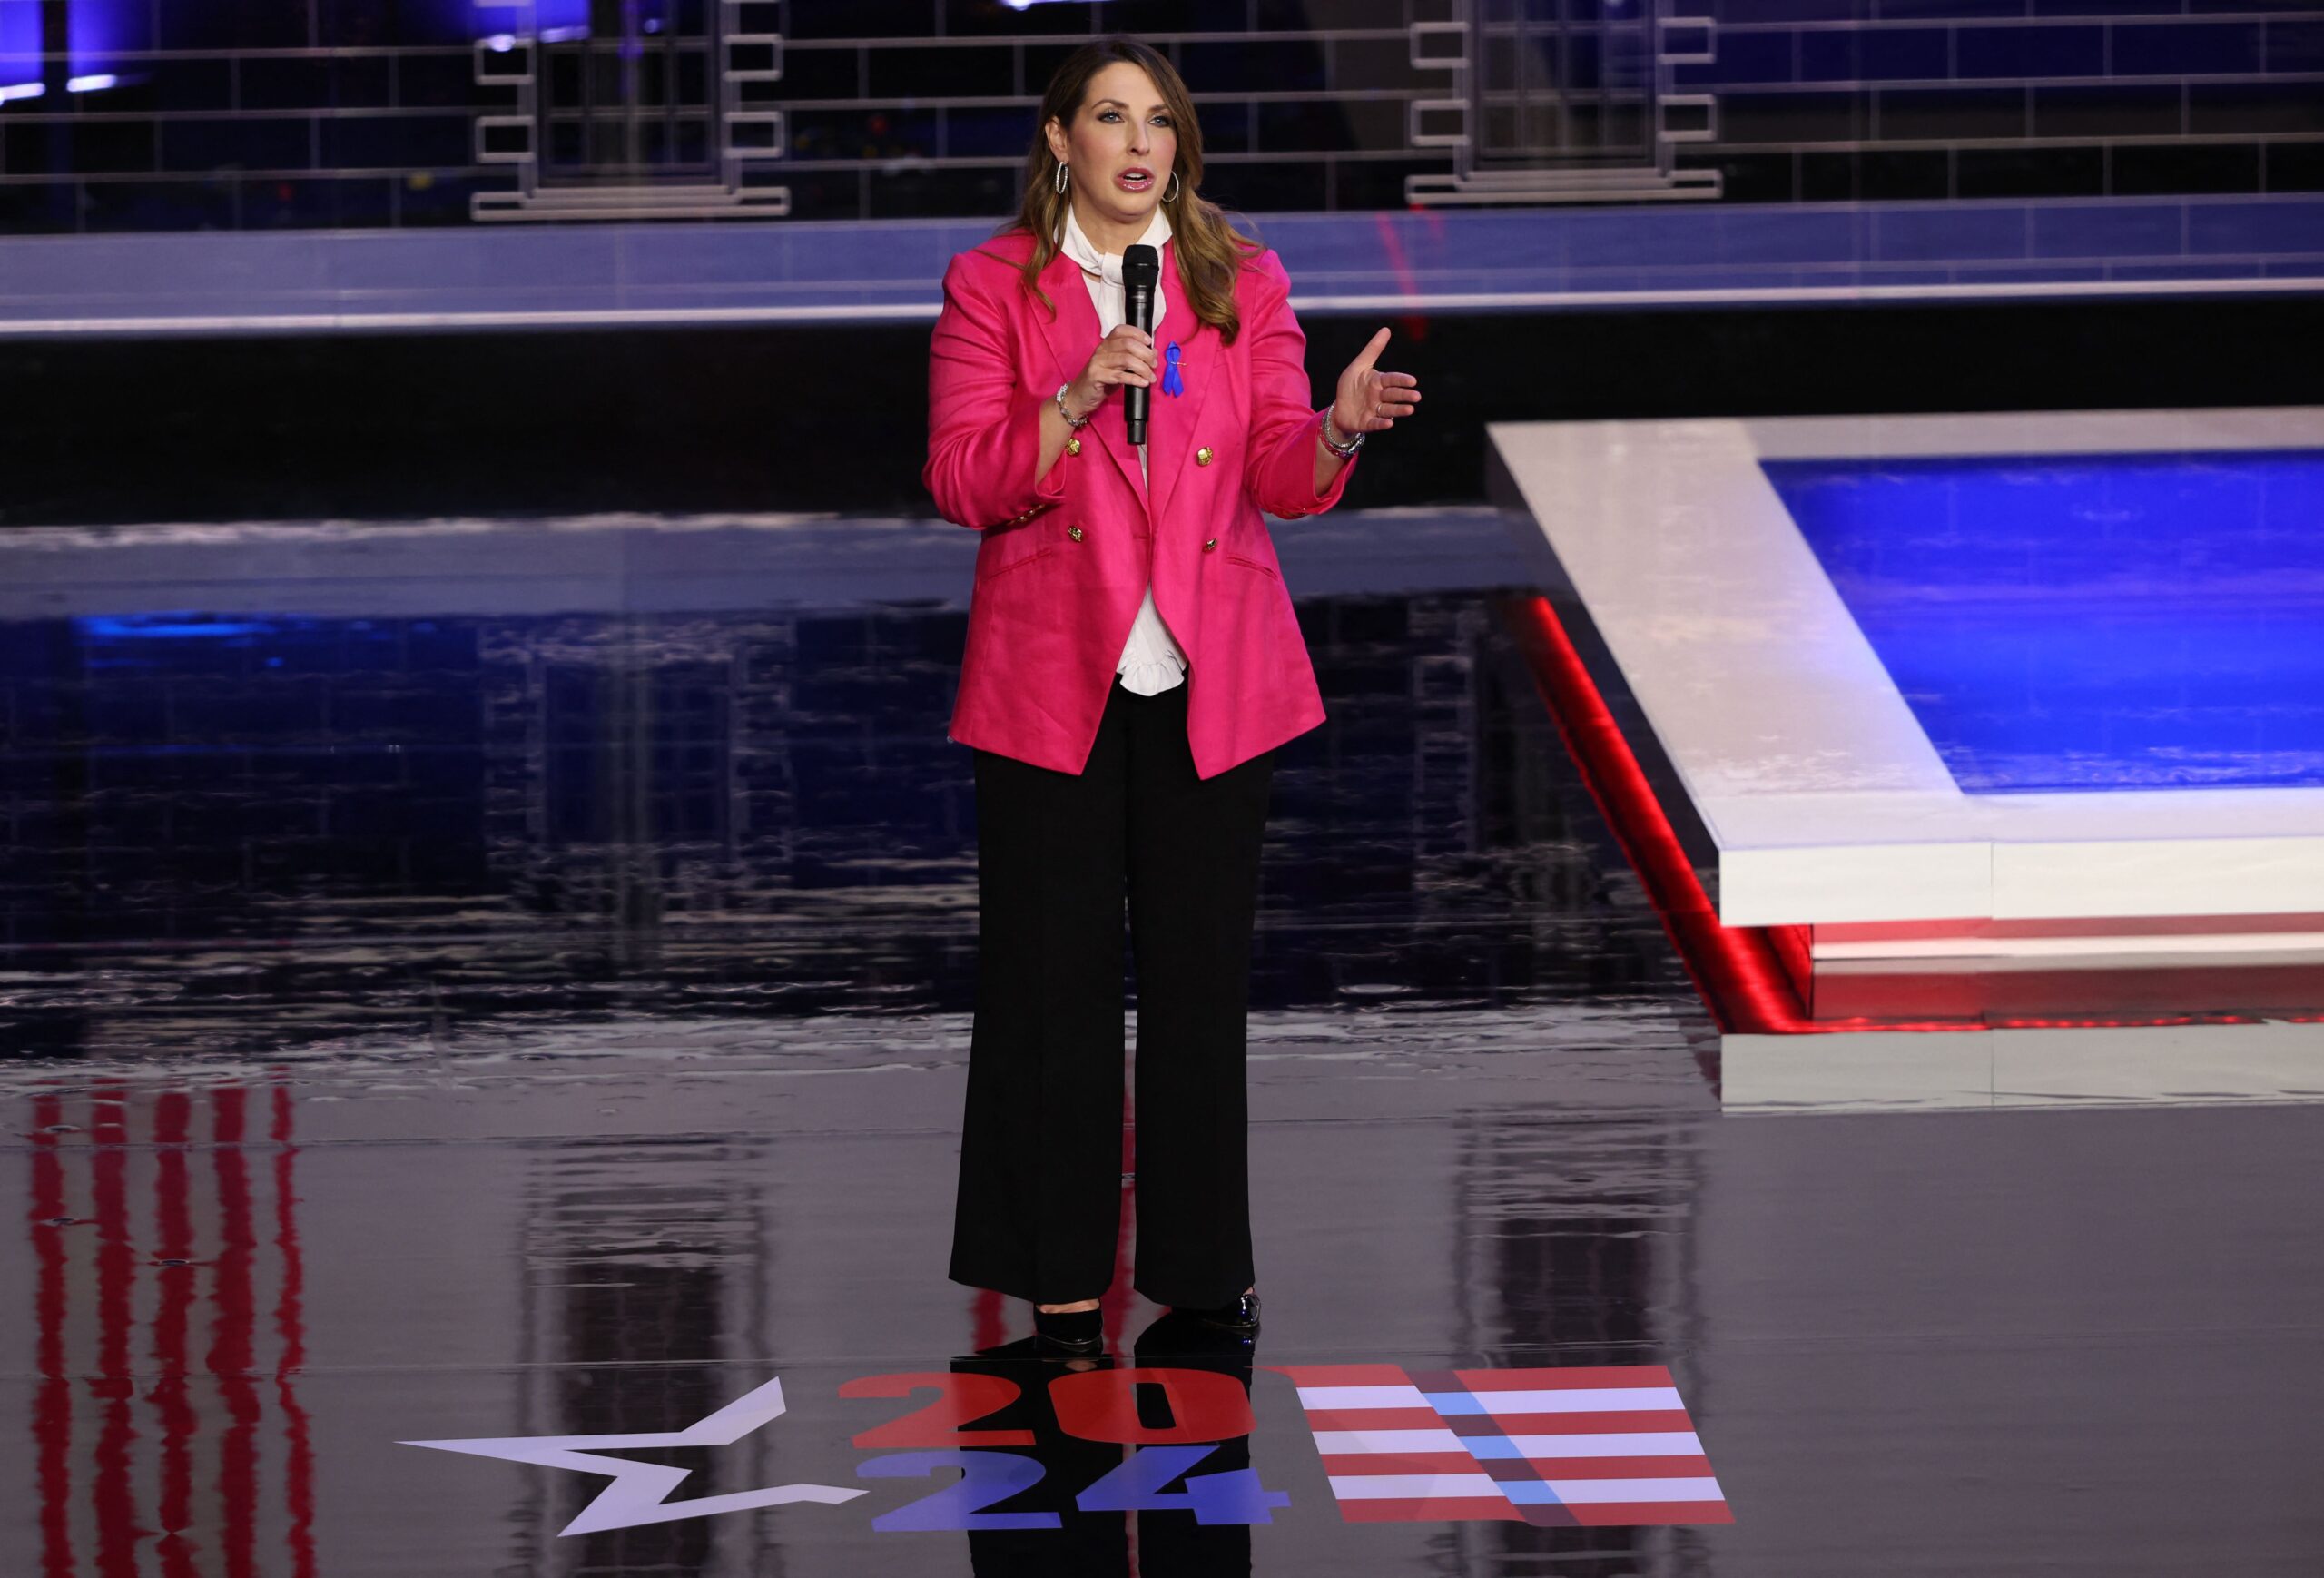 NBC hires former RNC chair Ronna McDaniel, who has demonized the press and refused to acknowledge Biden was fairly elected - Opinion and Analysis - News